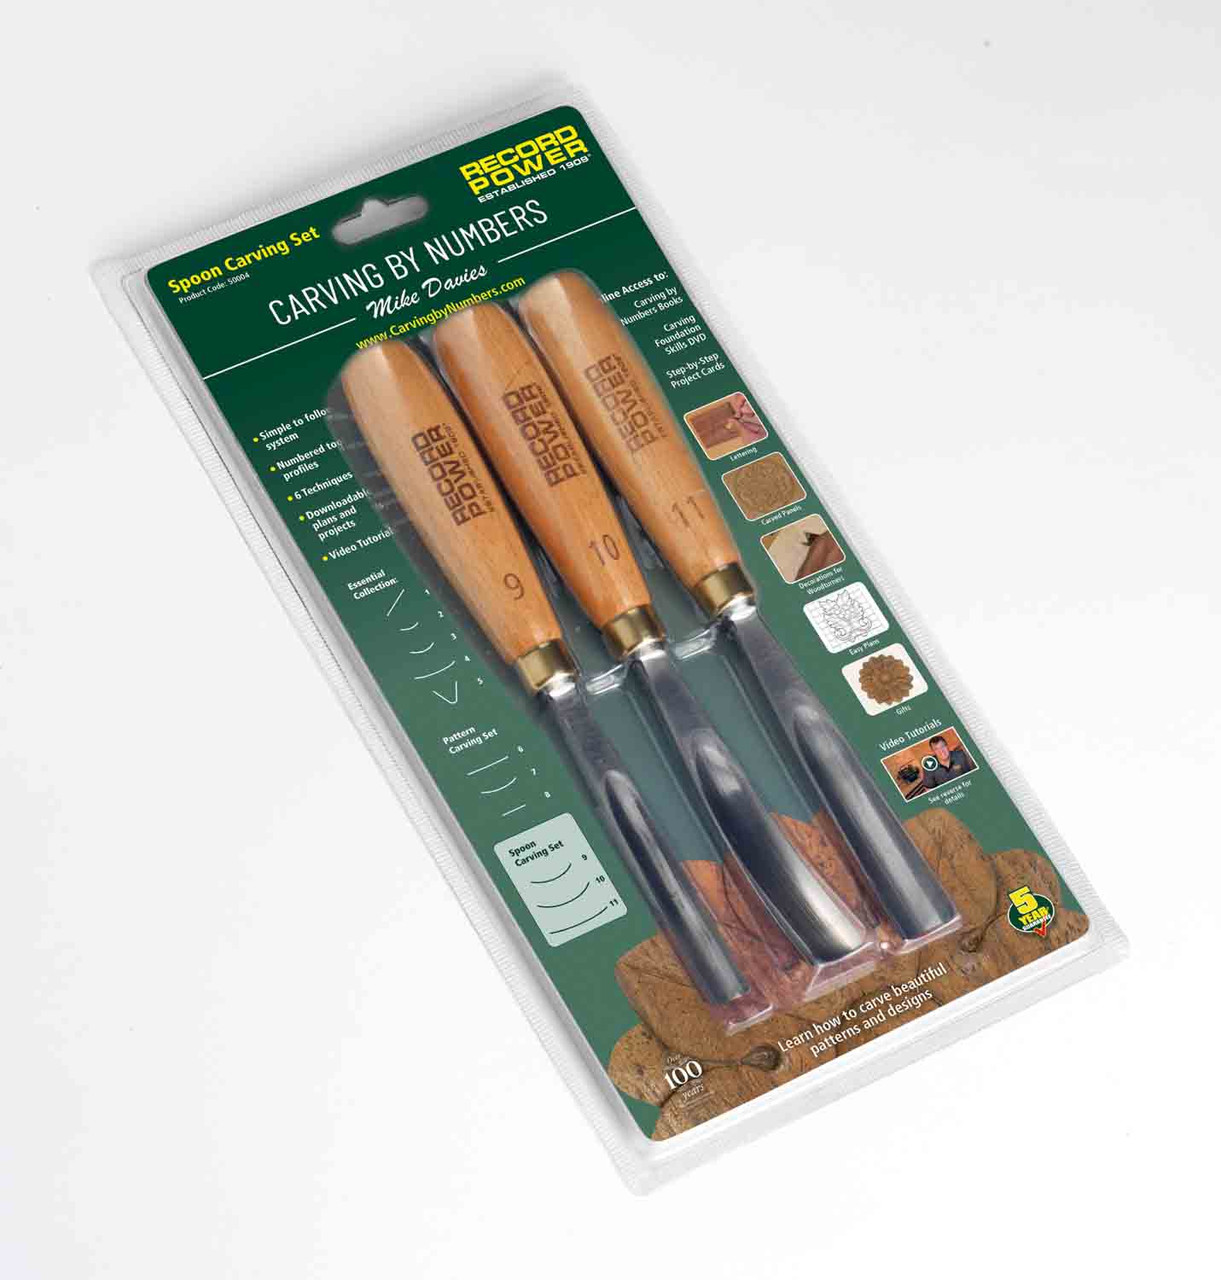 Record Power, 3 Piece Carving by Numbers Tool Set, Spoon Carving